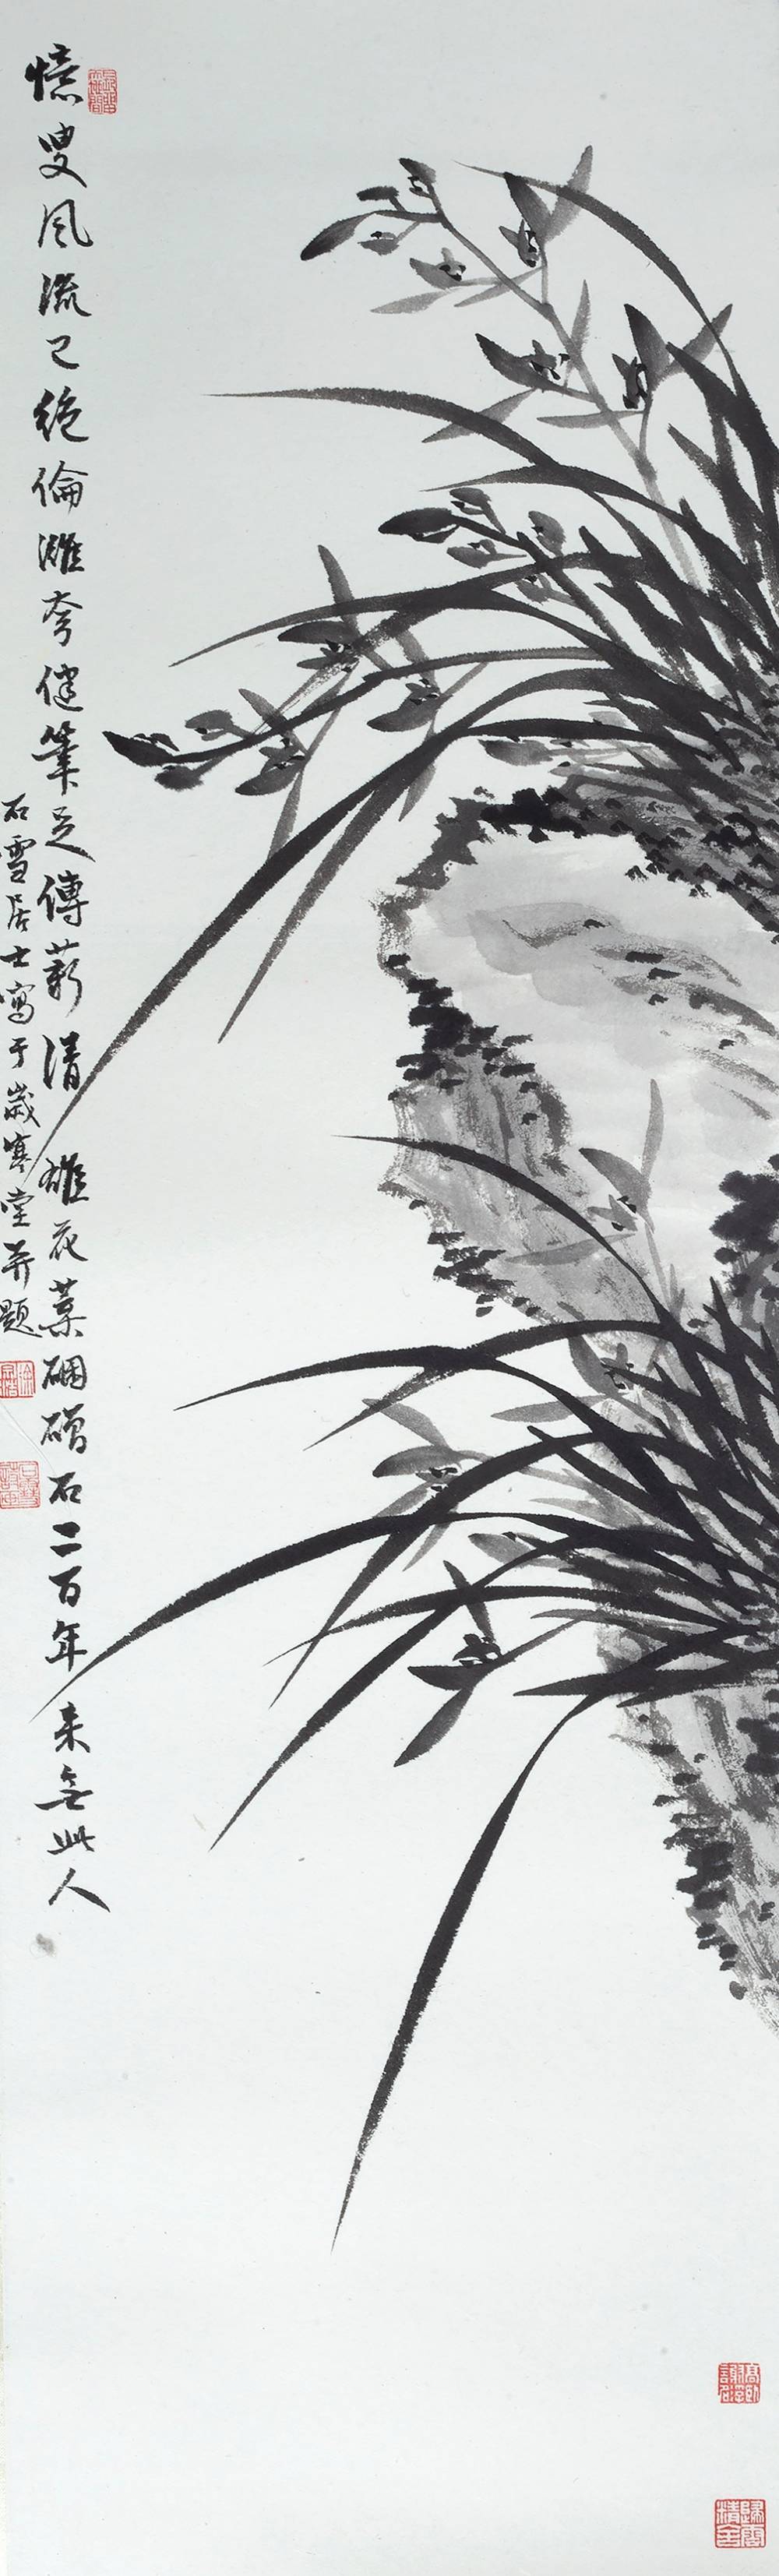 Xu Zonghao (1880-1957) orchids growing on rocks, scroll, ink on paper with artists seal mark 92cm